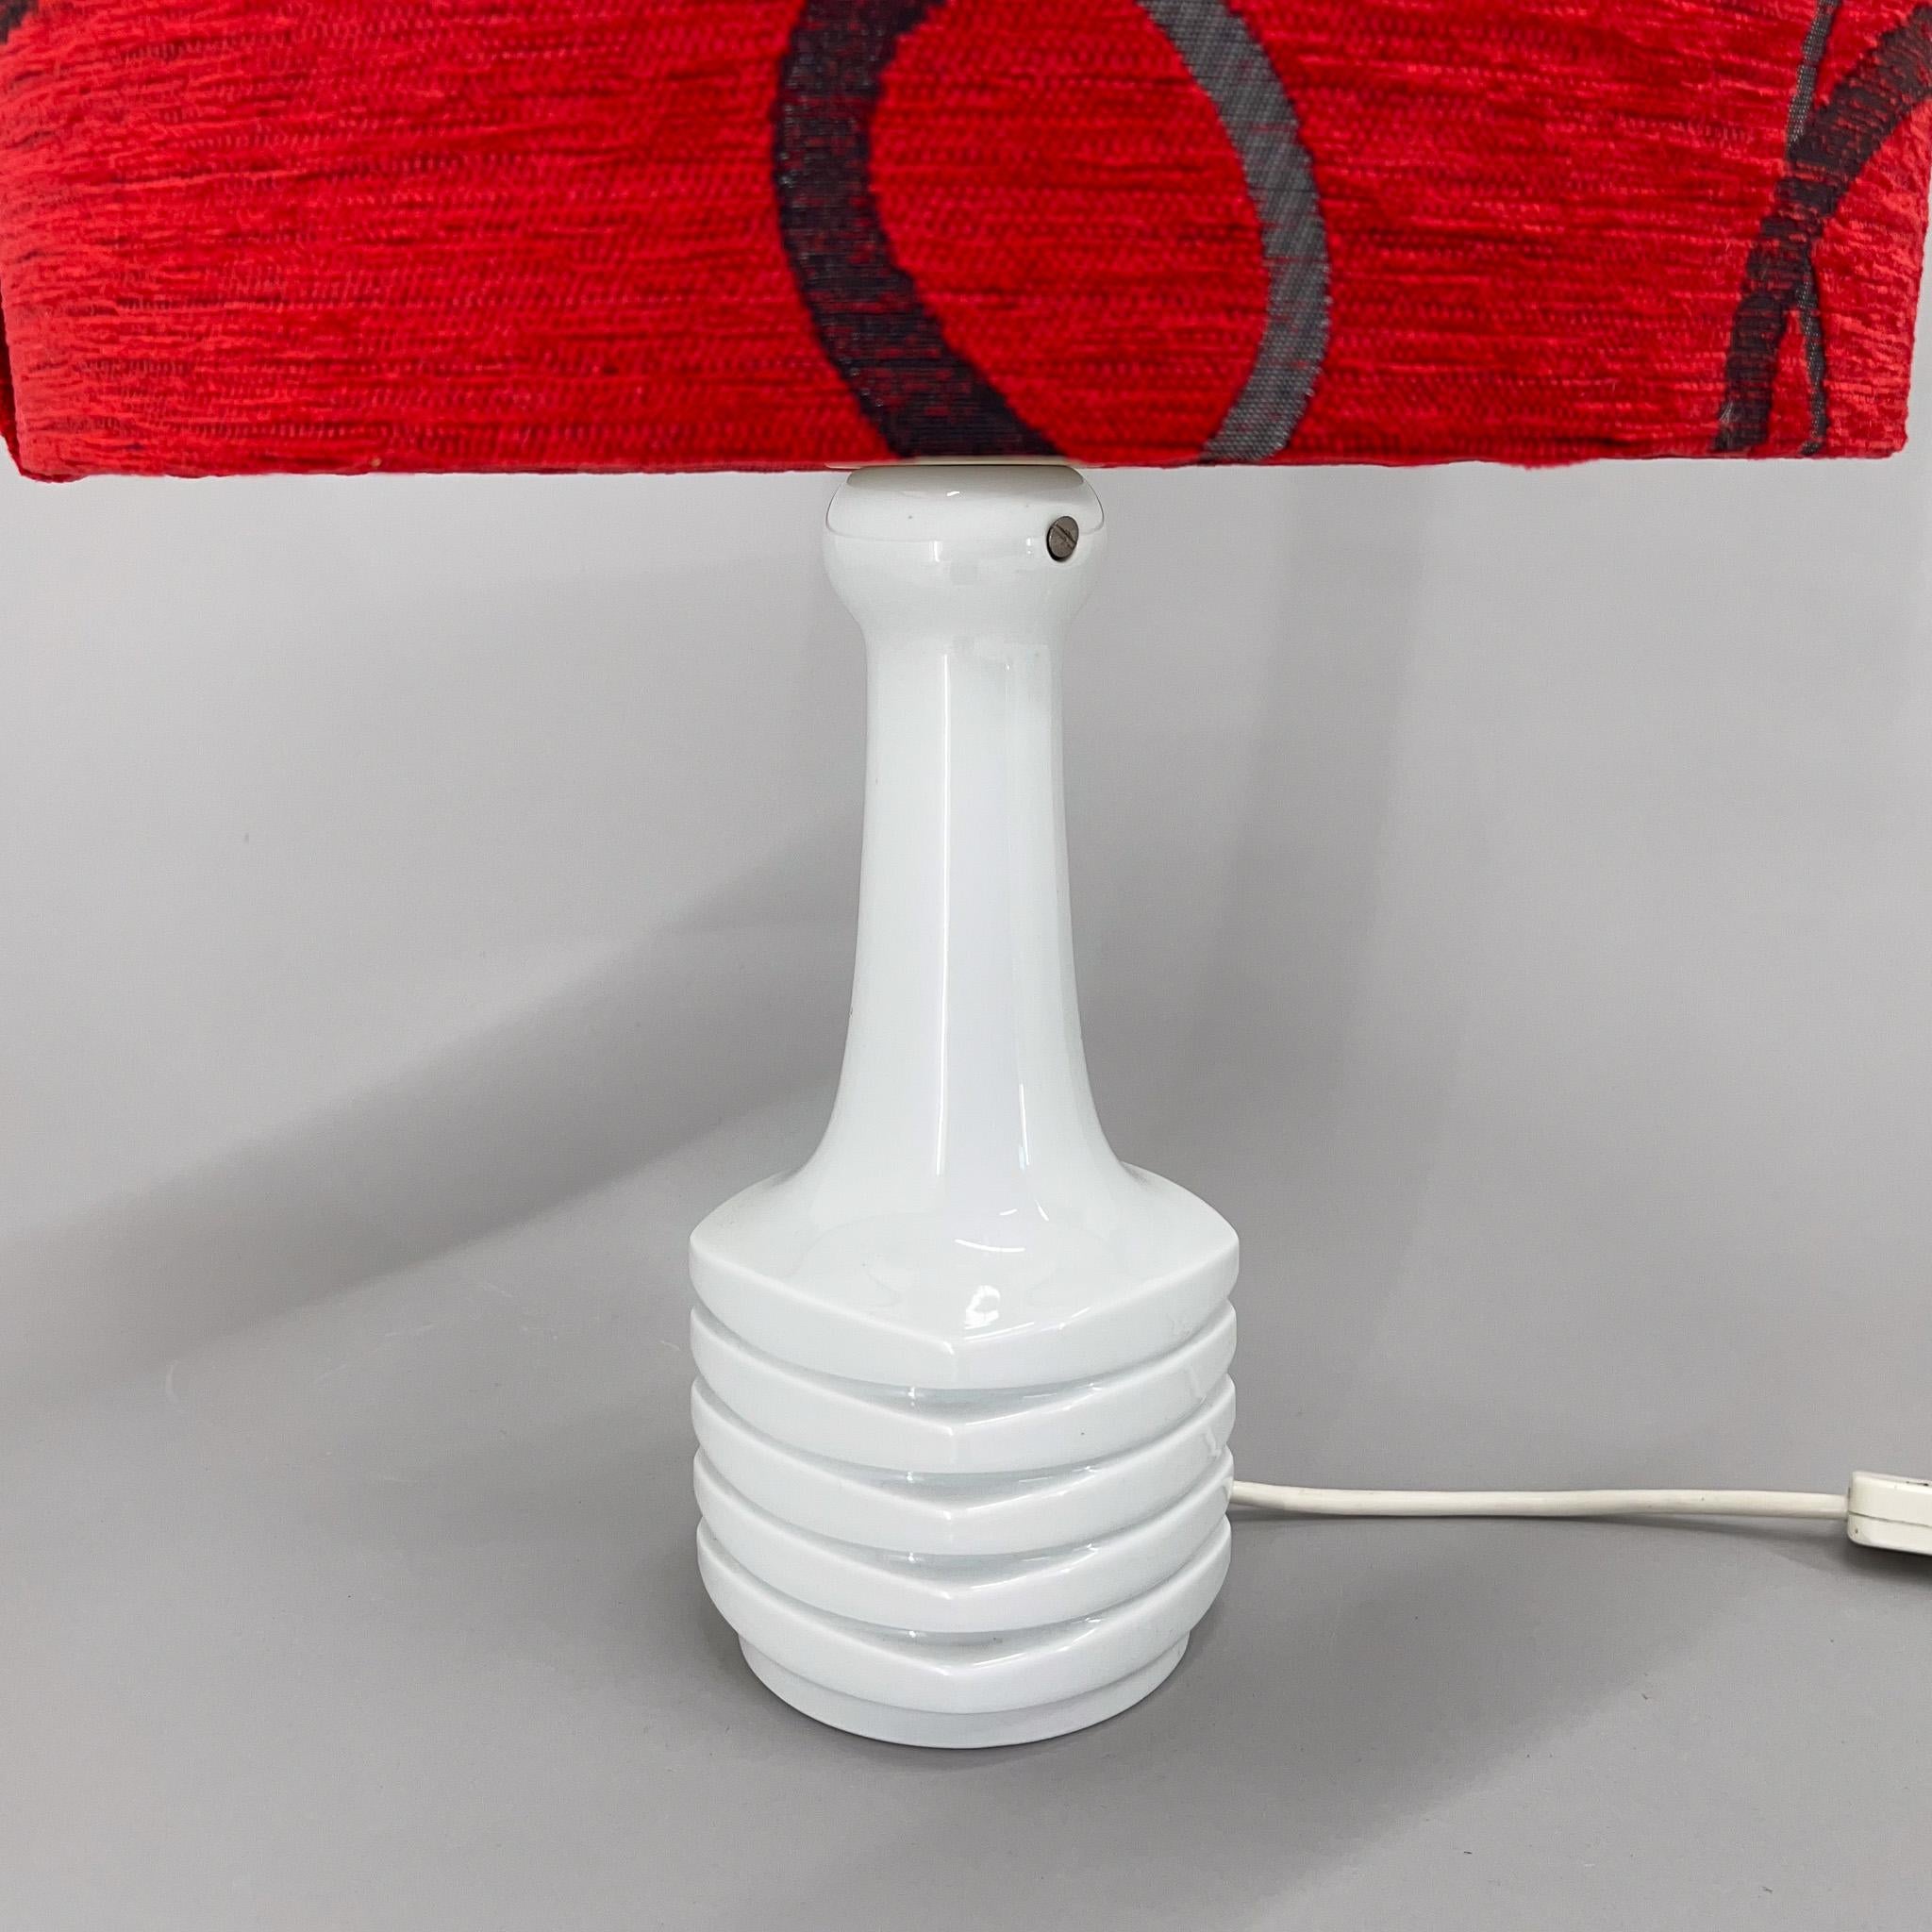 Mid-century Wallendorf Porcelain Table Lamp, Germany, 1960s For Sale 4